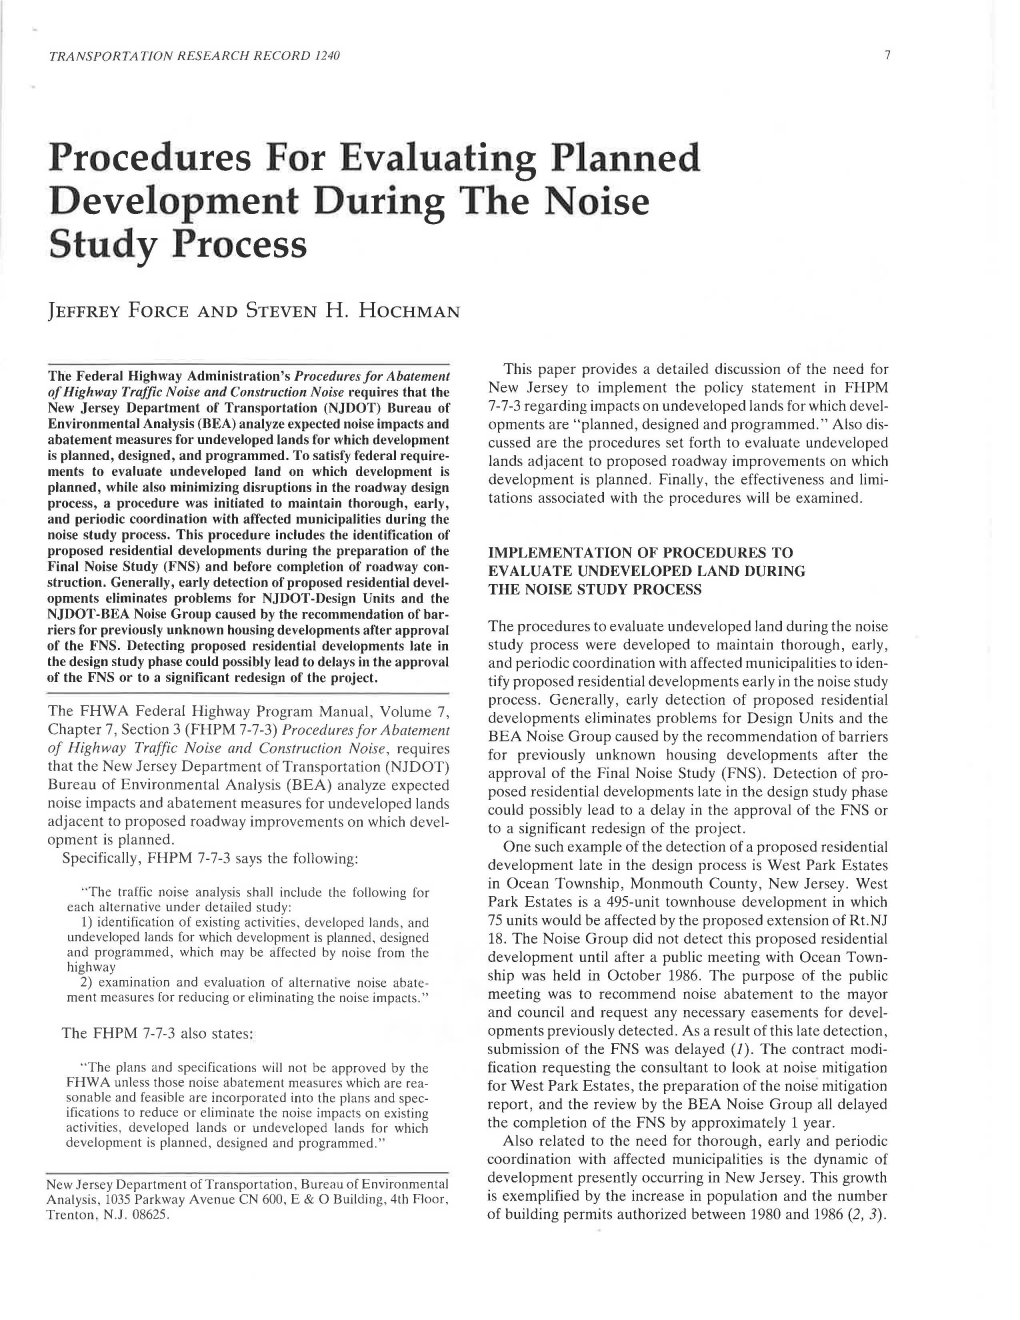 Procedures for Evaluating Planned Development During the Noise Study Process